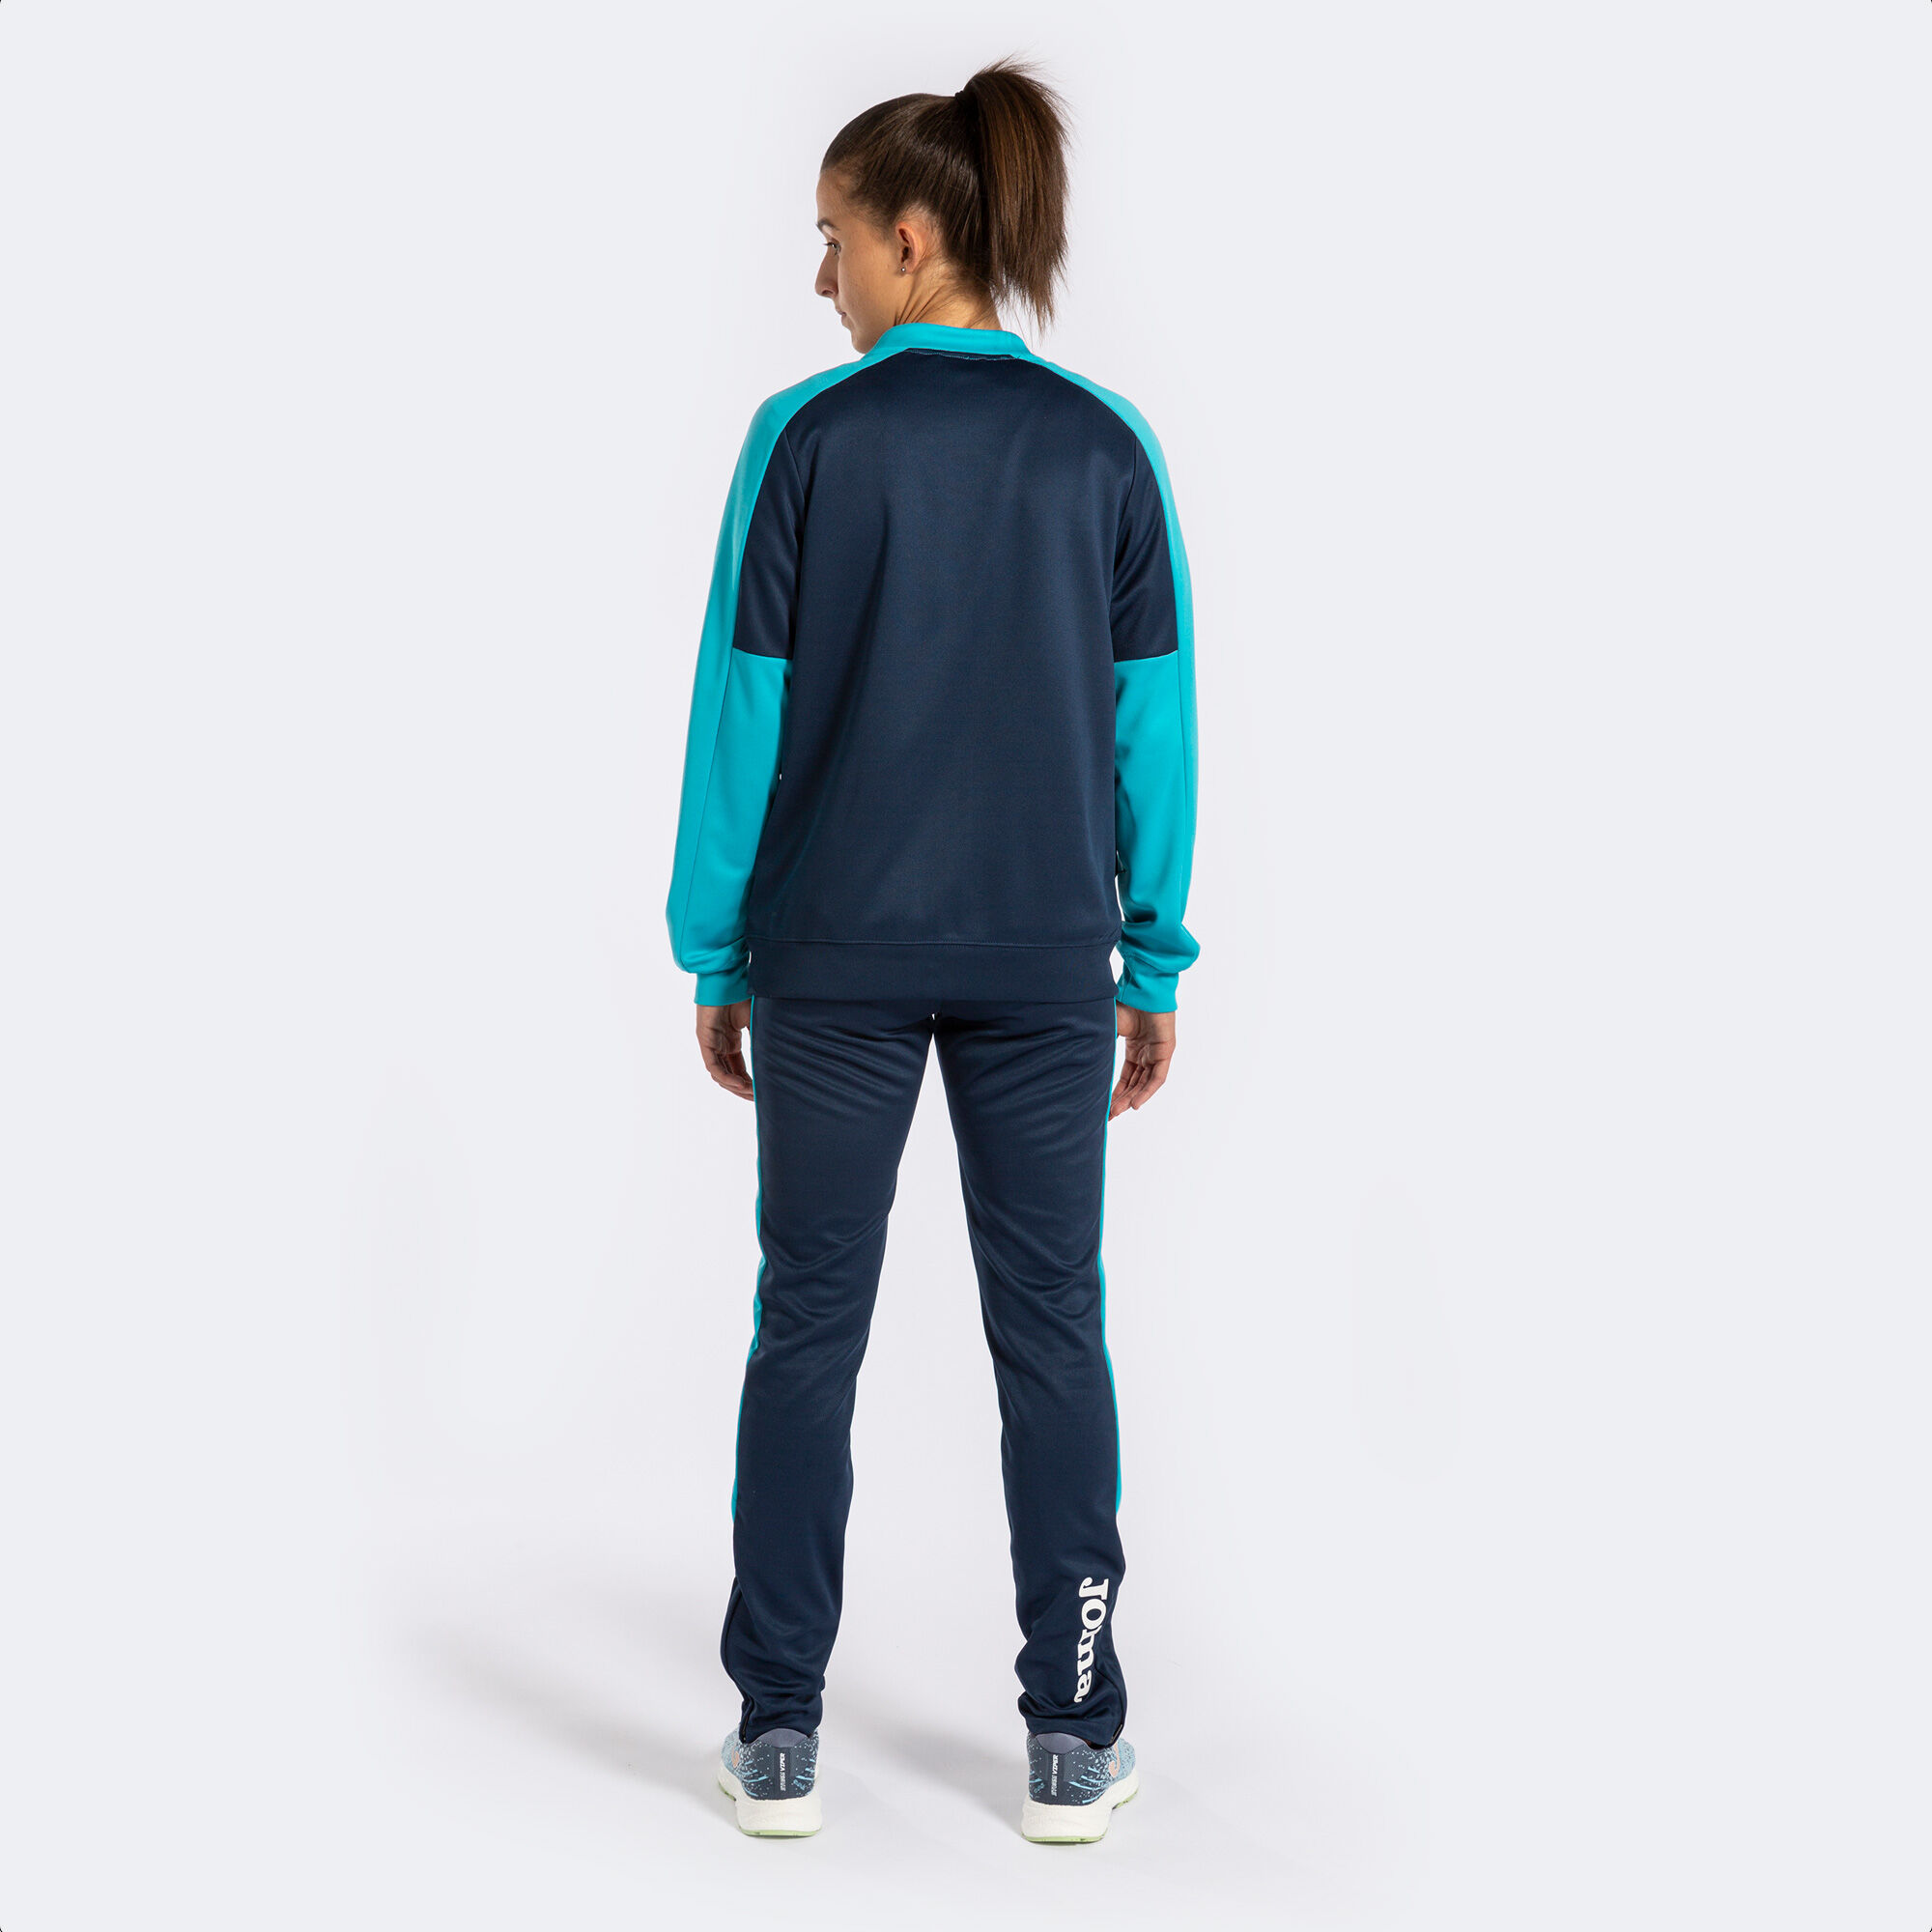 TRACKSUIT WOMAN ECO CHAMPIONSHIP NAVY BLUE FLUORESCENT TURQUOISE